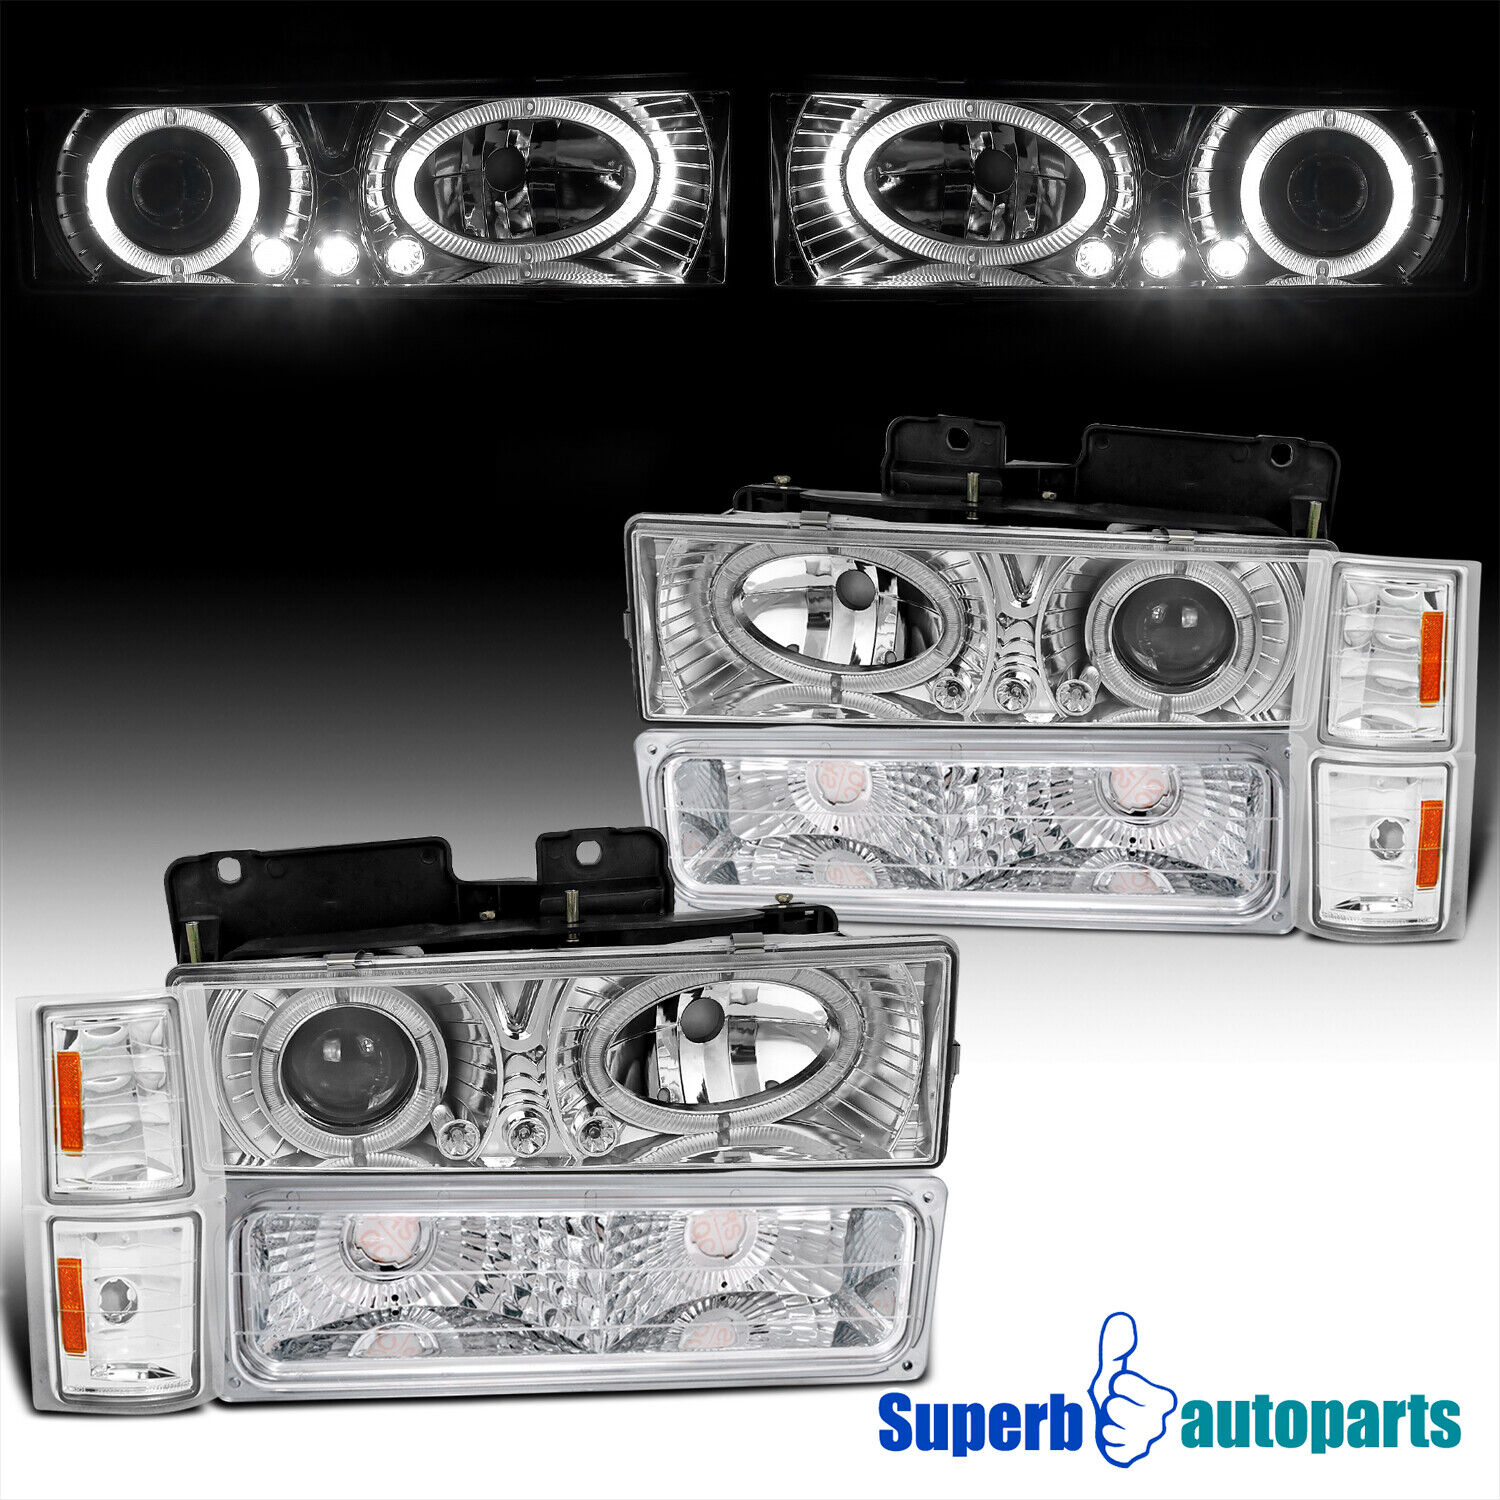 Fits 1994-1998 Chevy C10 Halo Projector Headlights Bumper LED Bar Lamps Pair